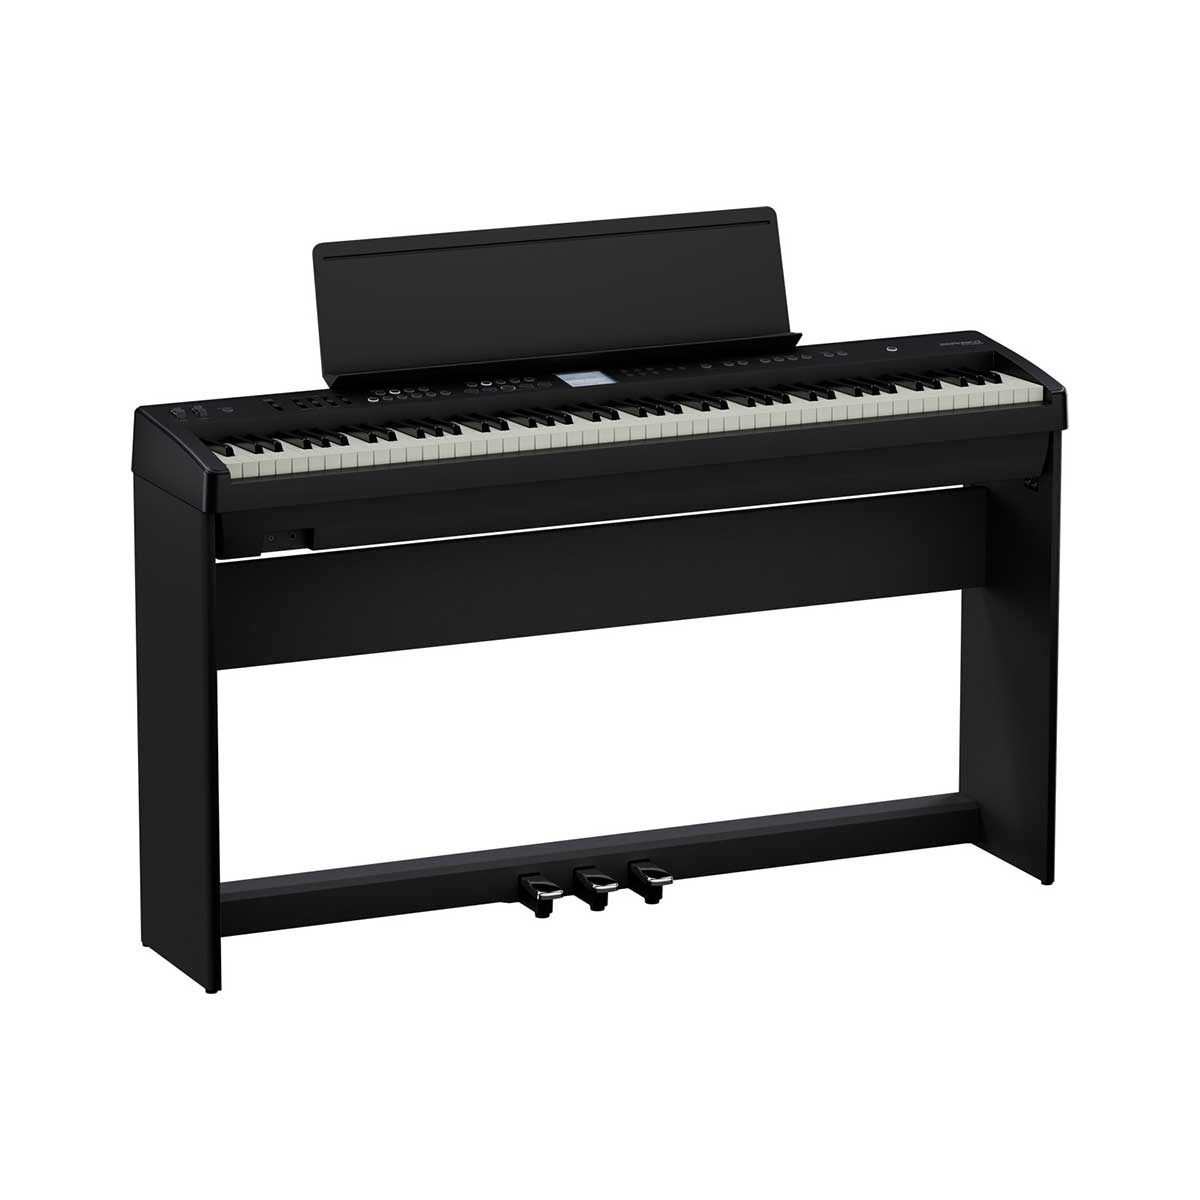 Roland FP-E50 Entertainment Piano BLACK Bundle includes KSFE50BK Timber Stand & KPD70 Pedal Board